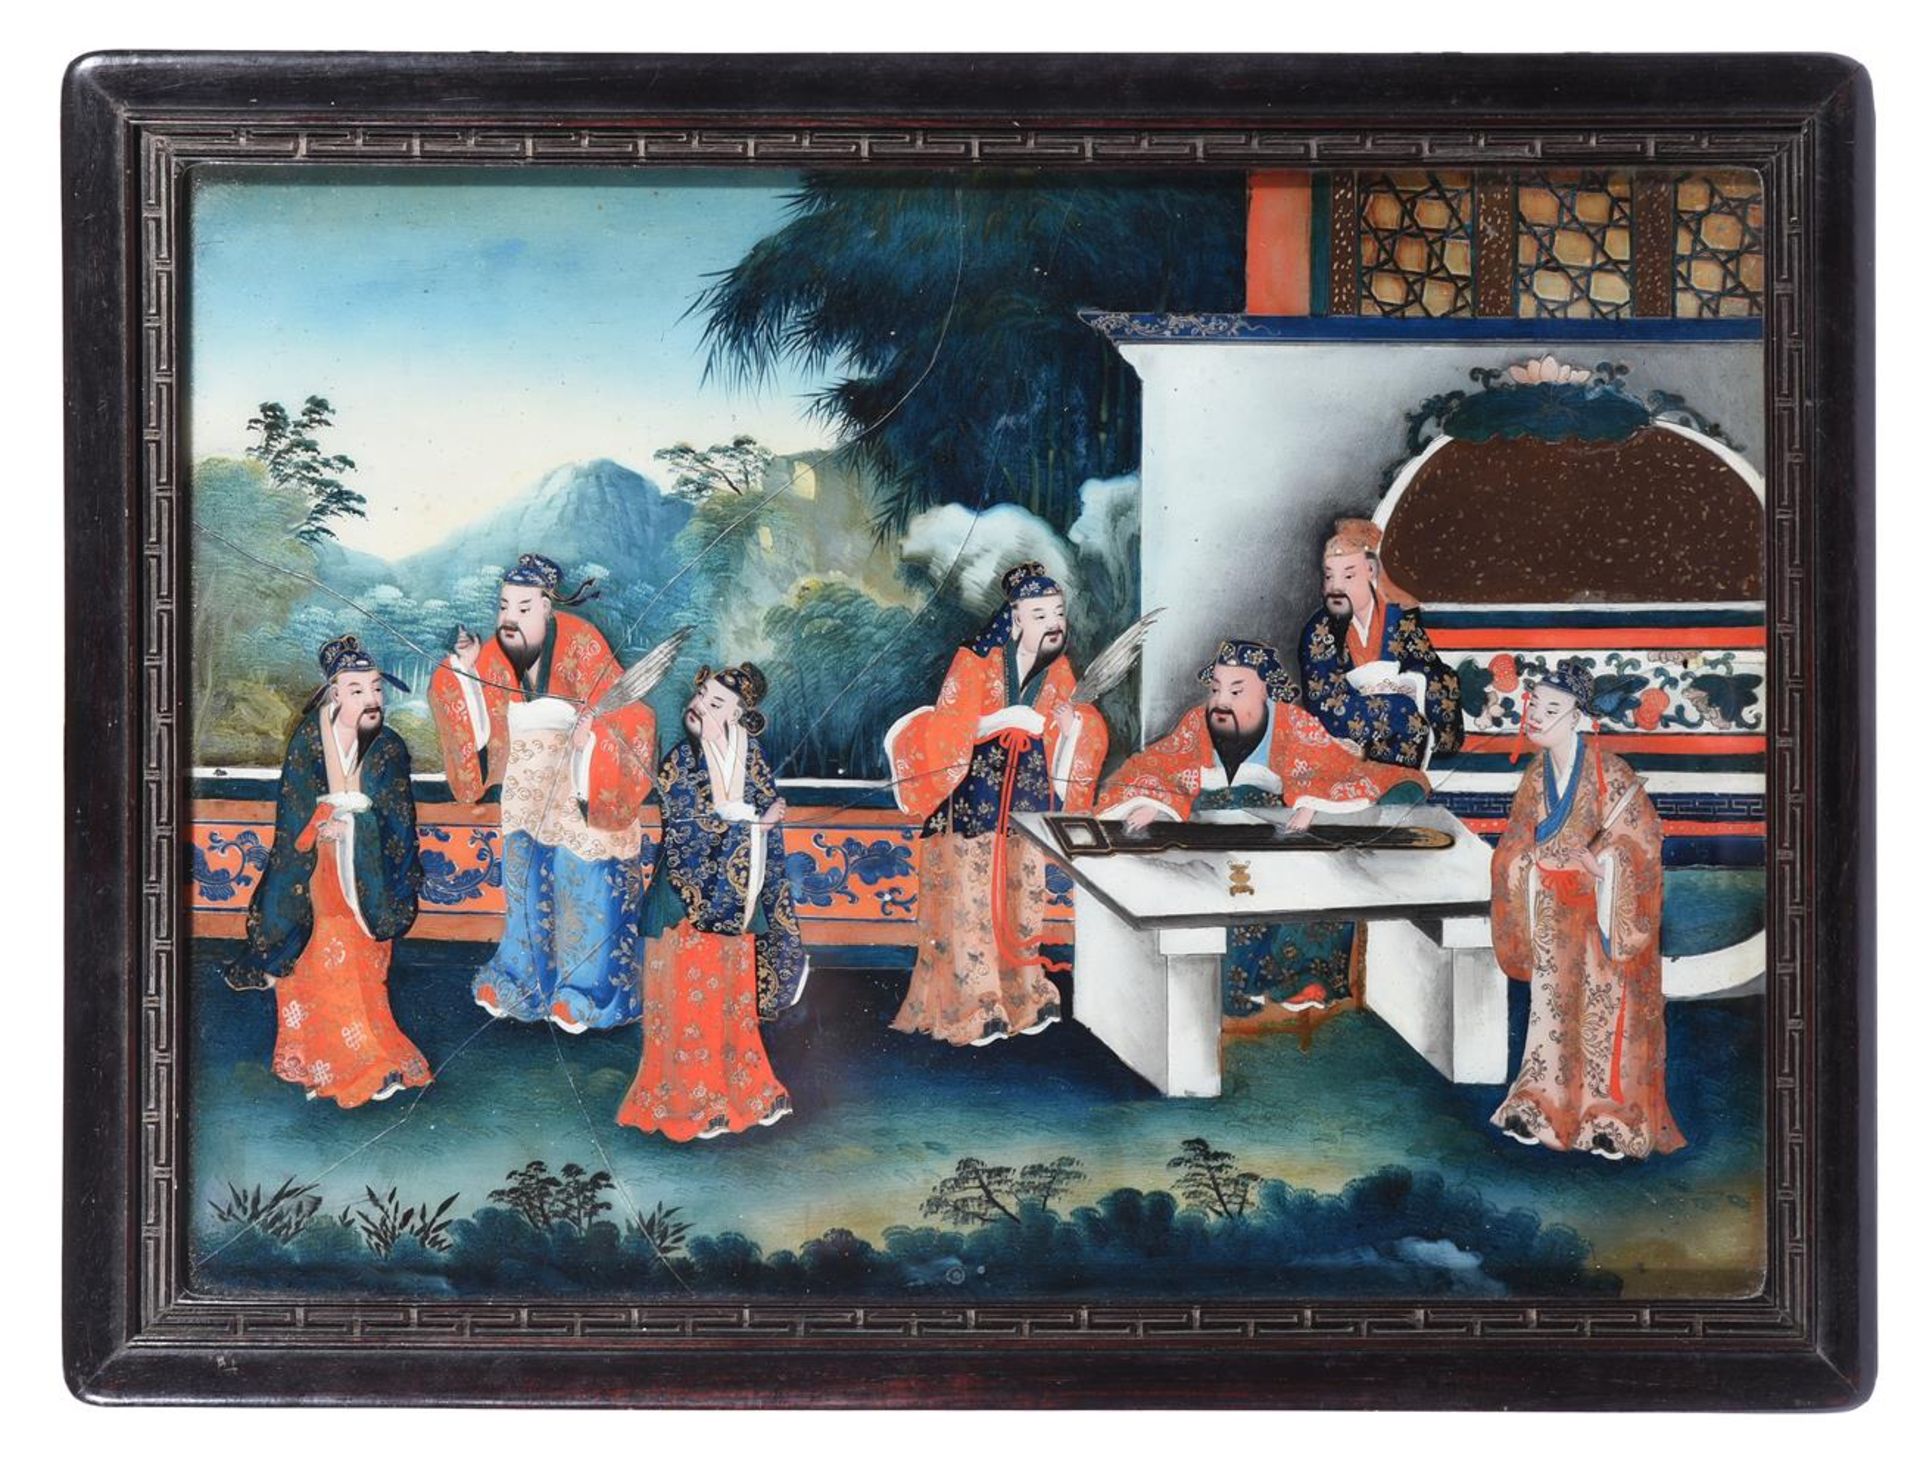 A CHINESE REVERSE GLASS PAINTING WITH HARDWOOD FRAME, LATE 18TH/ EARLY 19TH CENTURY